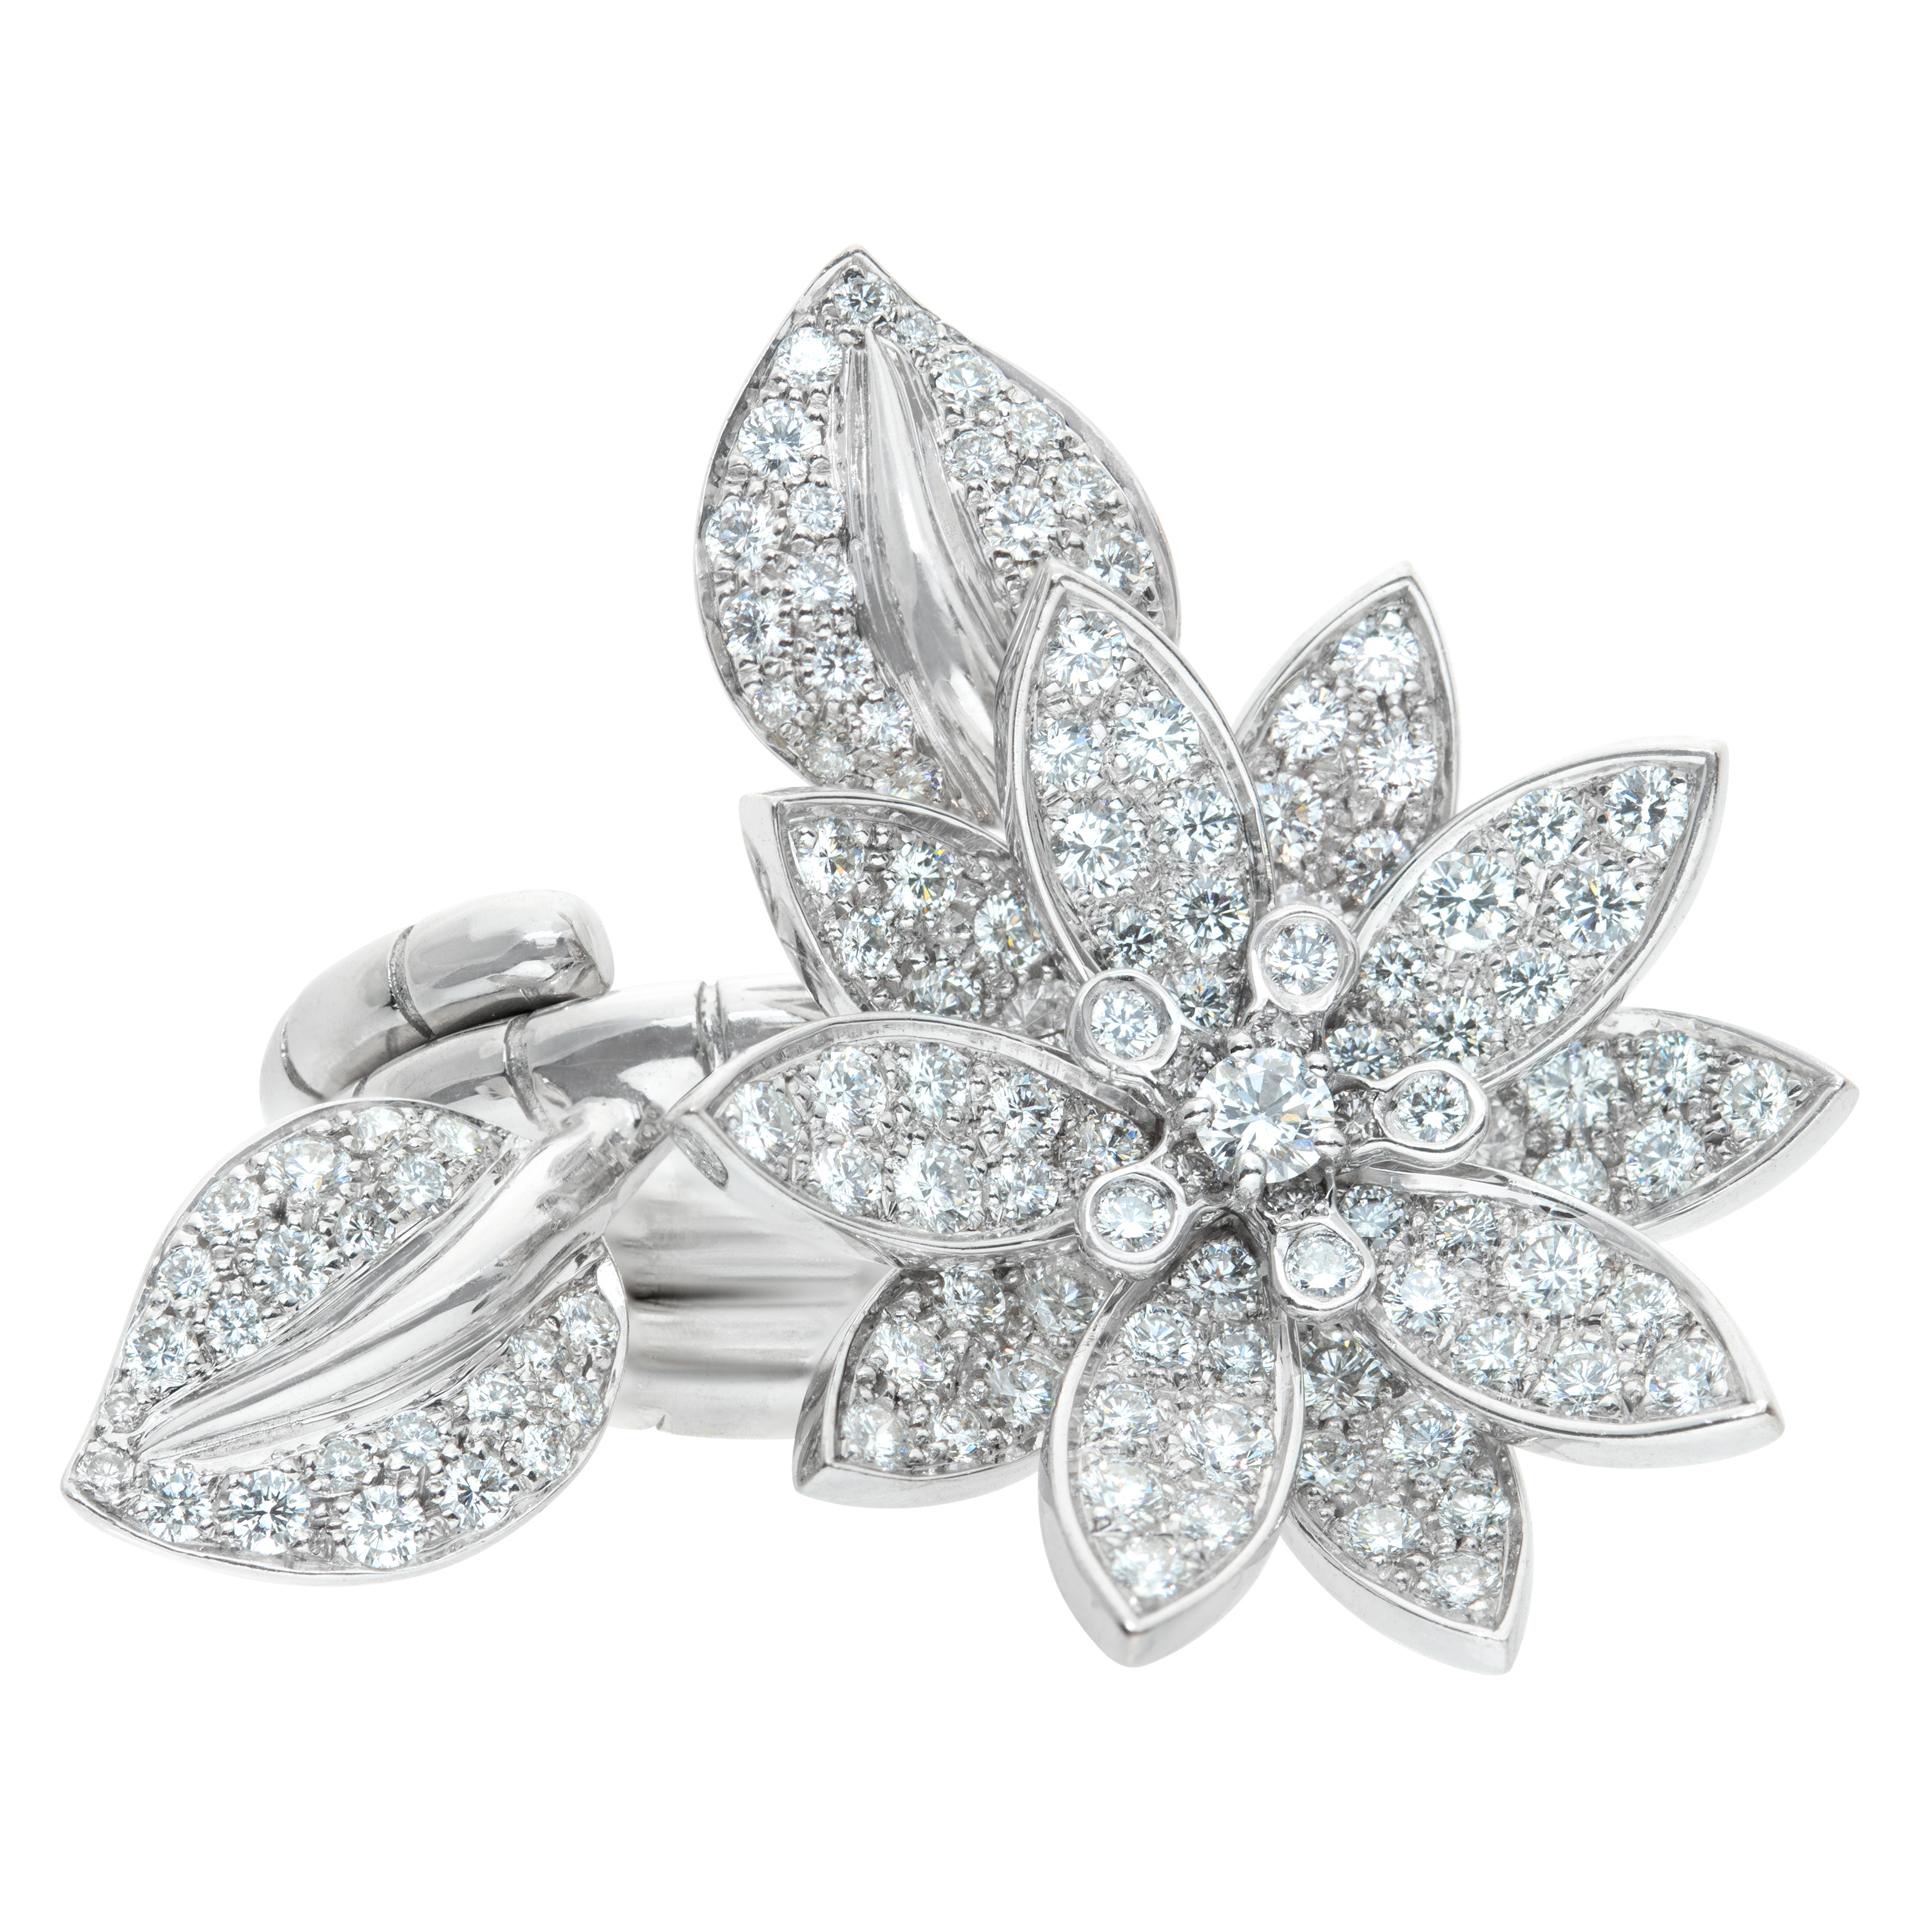 Van Cleef & Arpels Lotus Between the Finger ring in 18k white gold with approximately 2.15 carats in D,E,F color, IF - VVS clarity diamonds. Size 6.25.